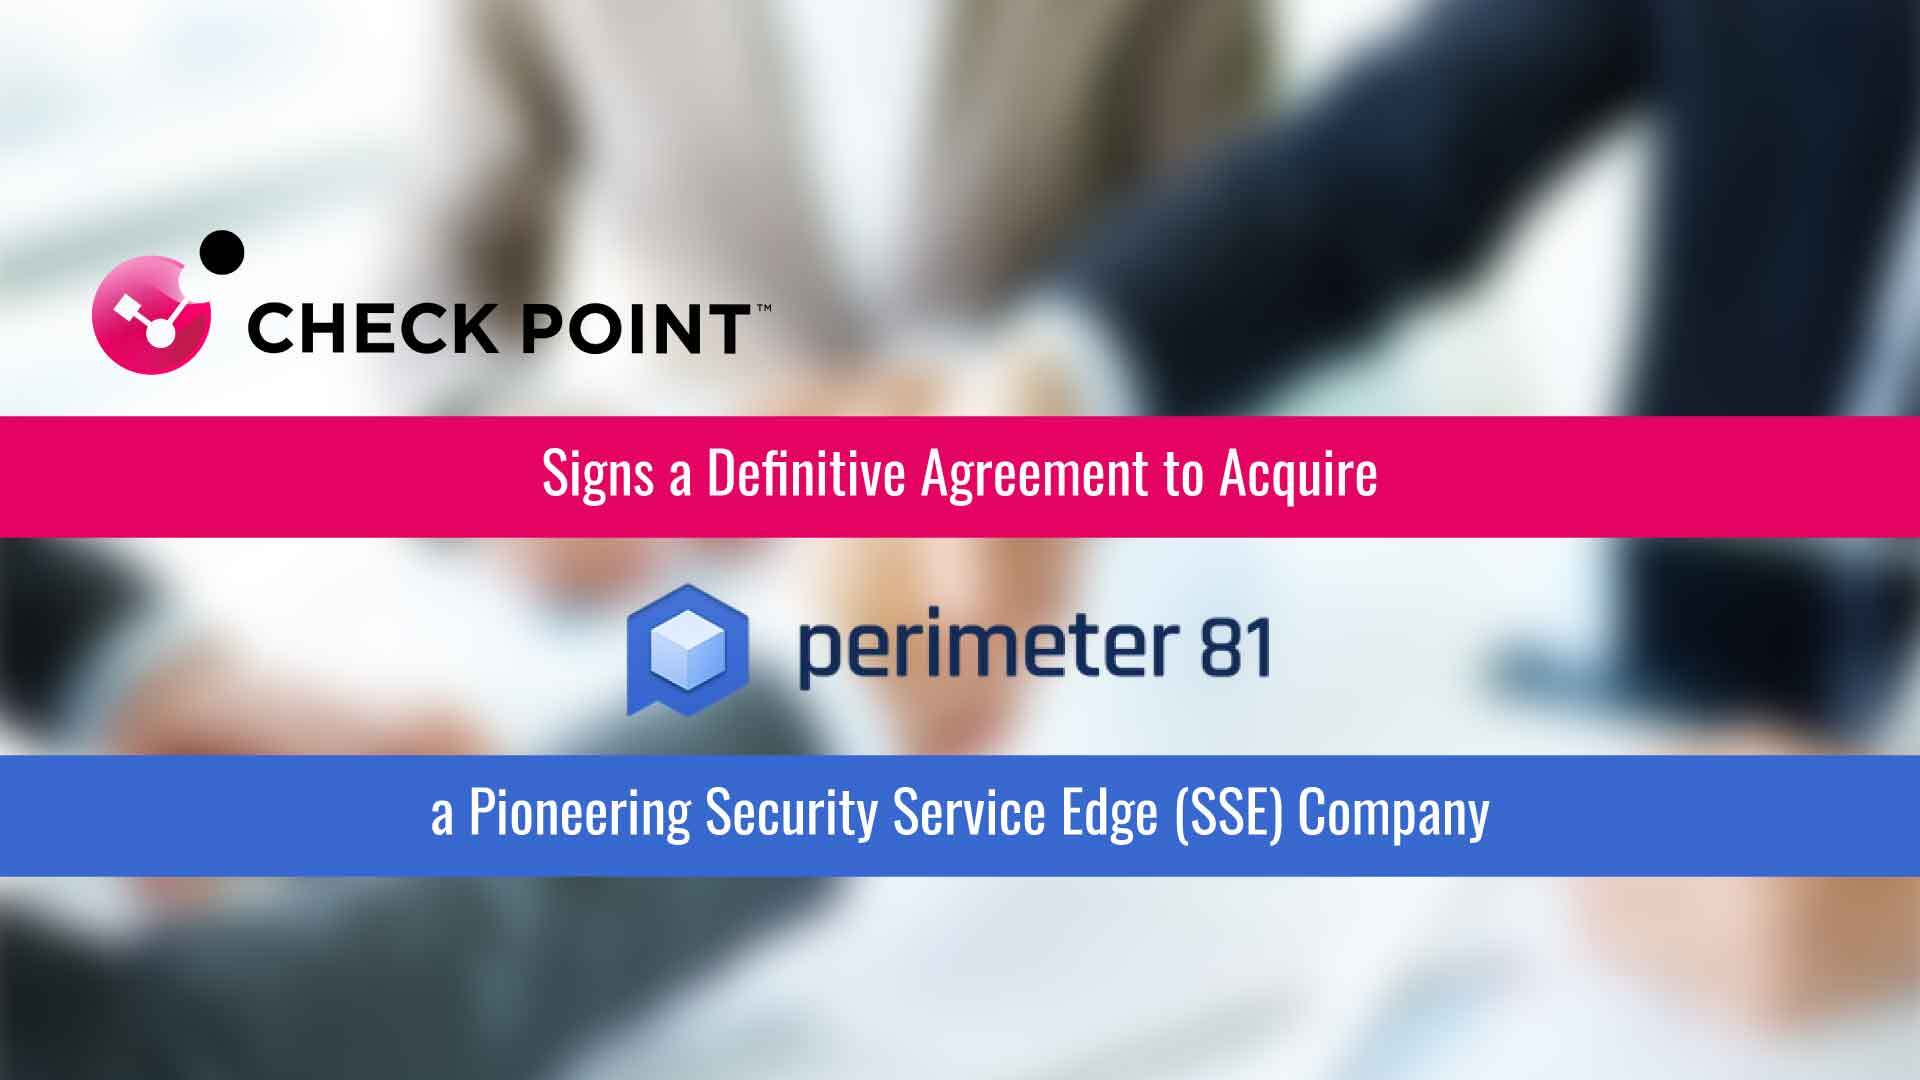 Check Point to Acquire Perimeter 81 - to Deliver the Fastest and most Secure SASE Solution in the Industry